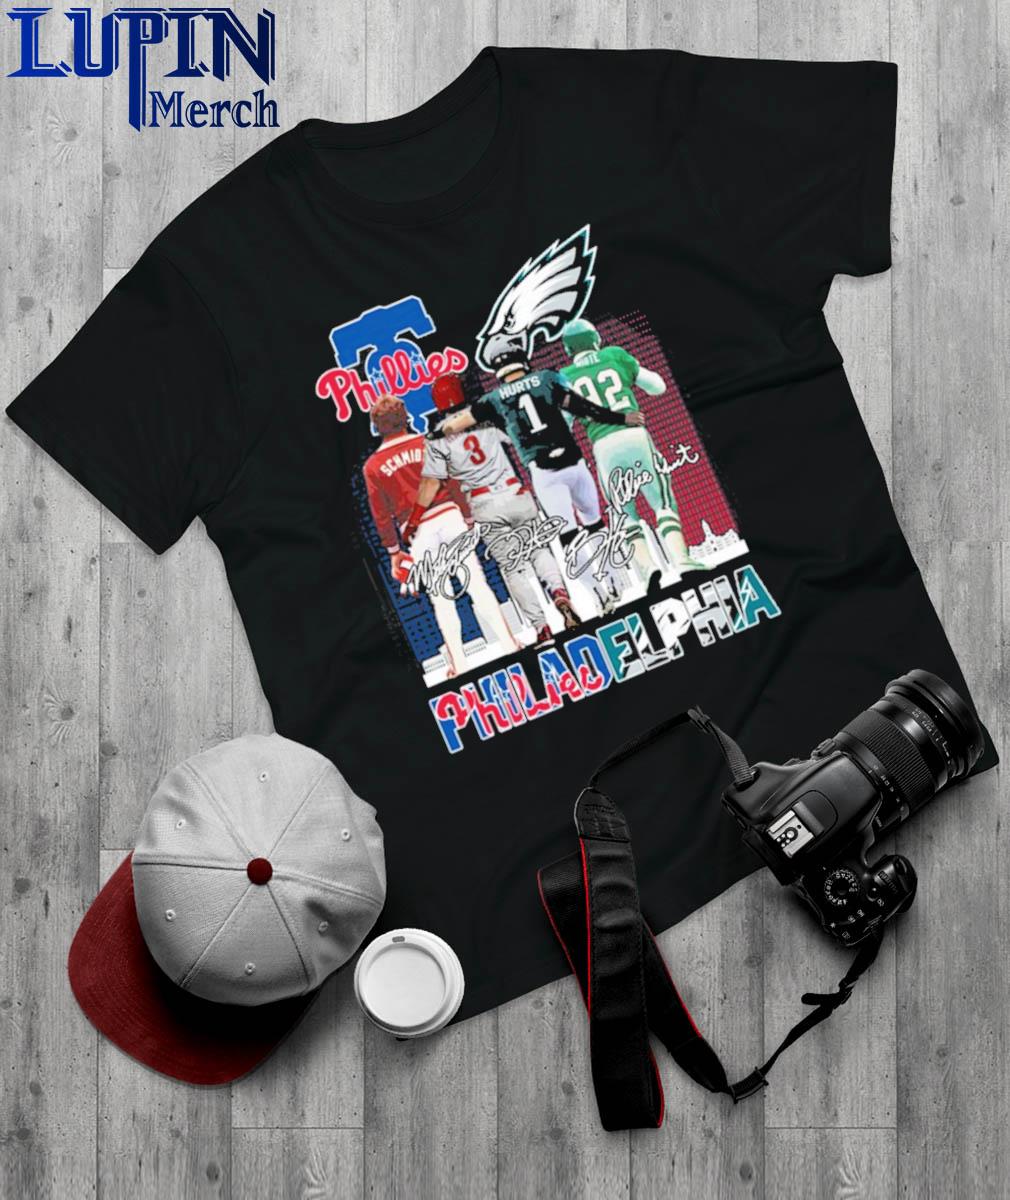 Philadelphia Phillies And Philadelphia Eagles Mike Schmidt Bryce Harper  Jalen Hurts And Kyzir White Signatures t-shirt - ColorfulTeesOutlet